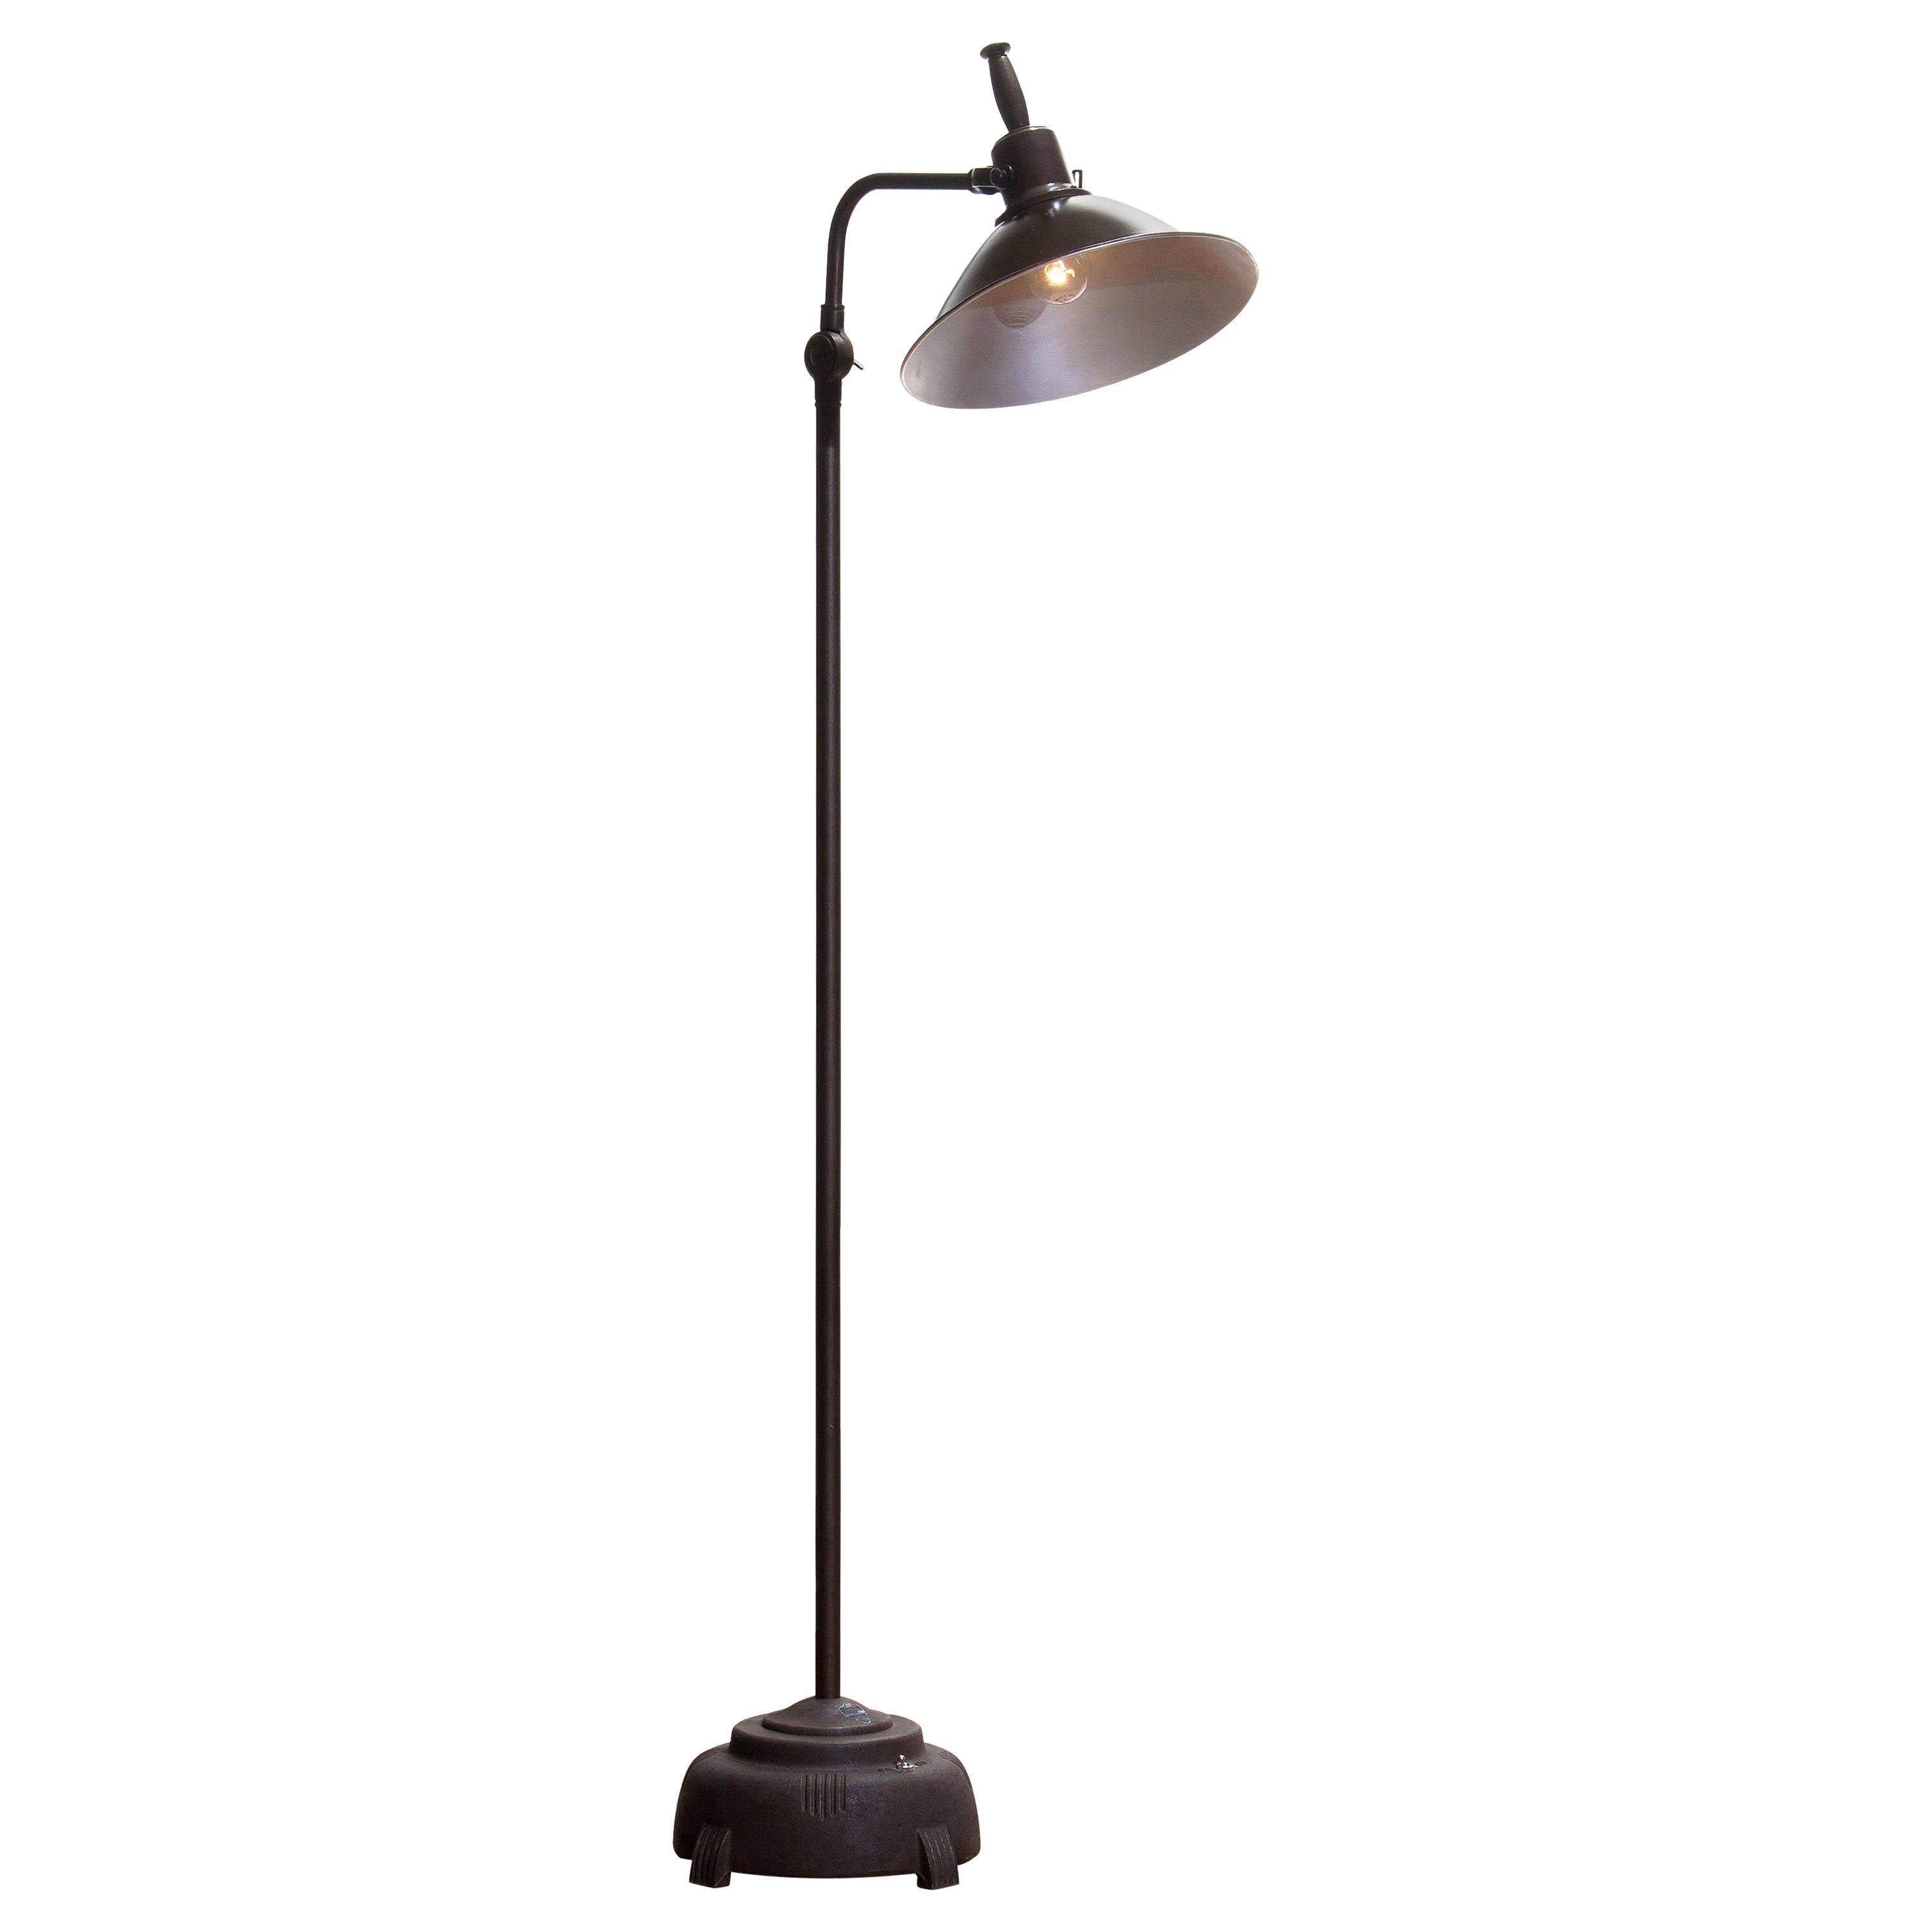 Absolutely amazing an in good condition Industrial floor lamp (formal sunlamp) from Faries Manufacturing MFG & Co made in Illinois USA in brass or cast iron or aluminium!
The lamp is newly wired and therefore suitable for 220 / 110 volts max. 100